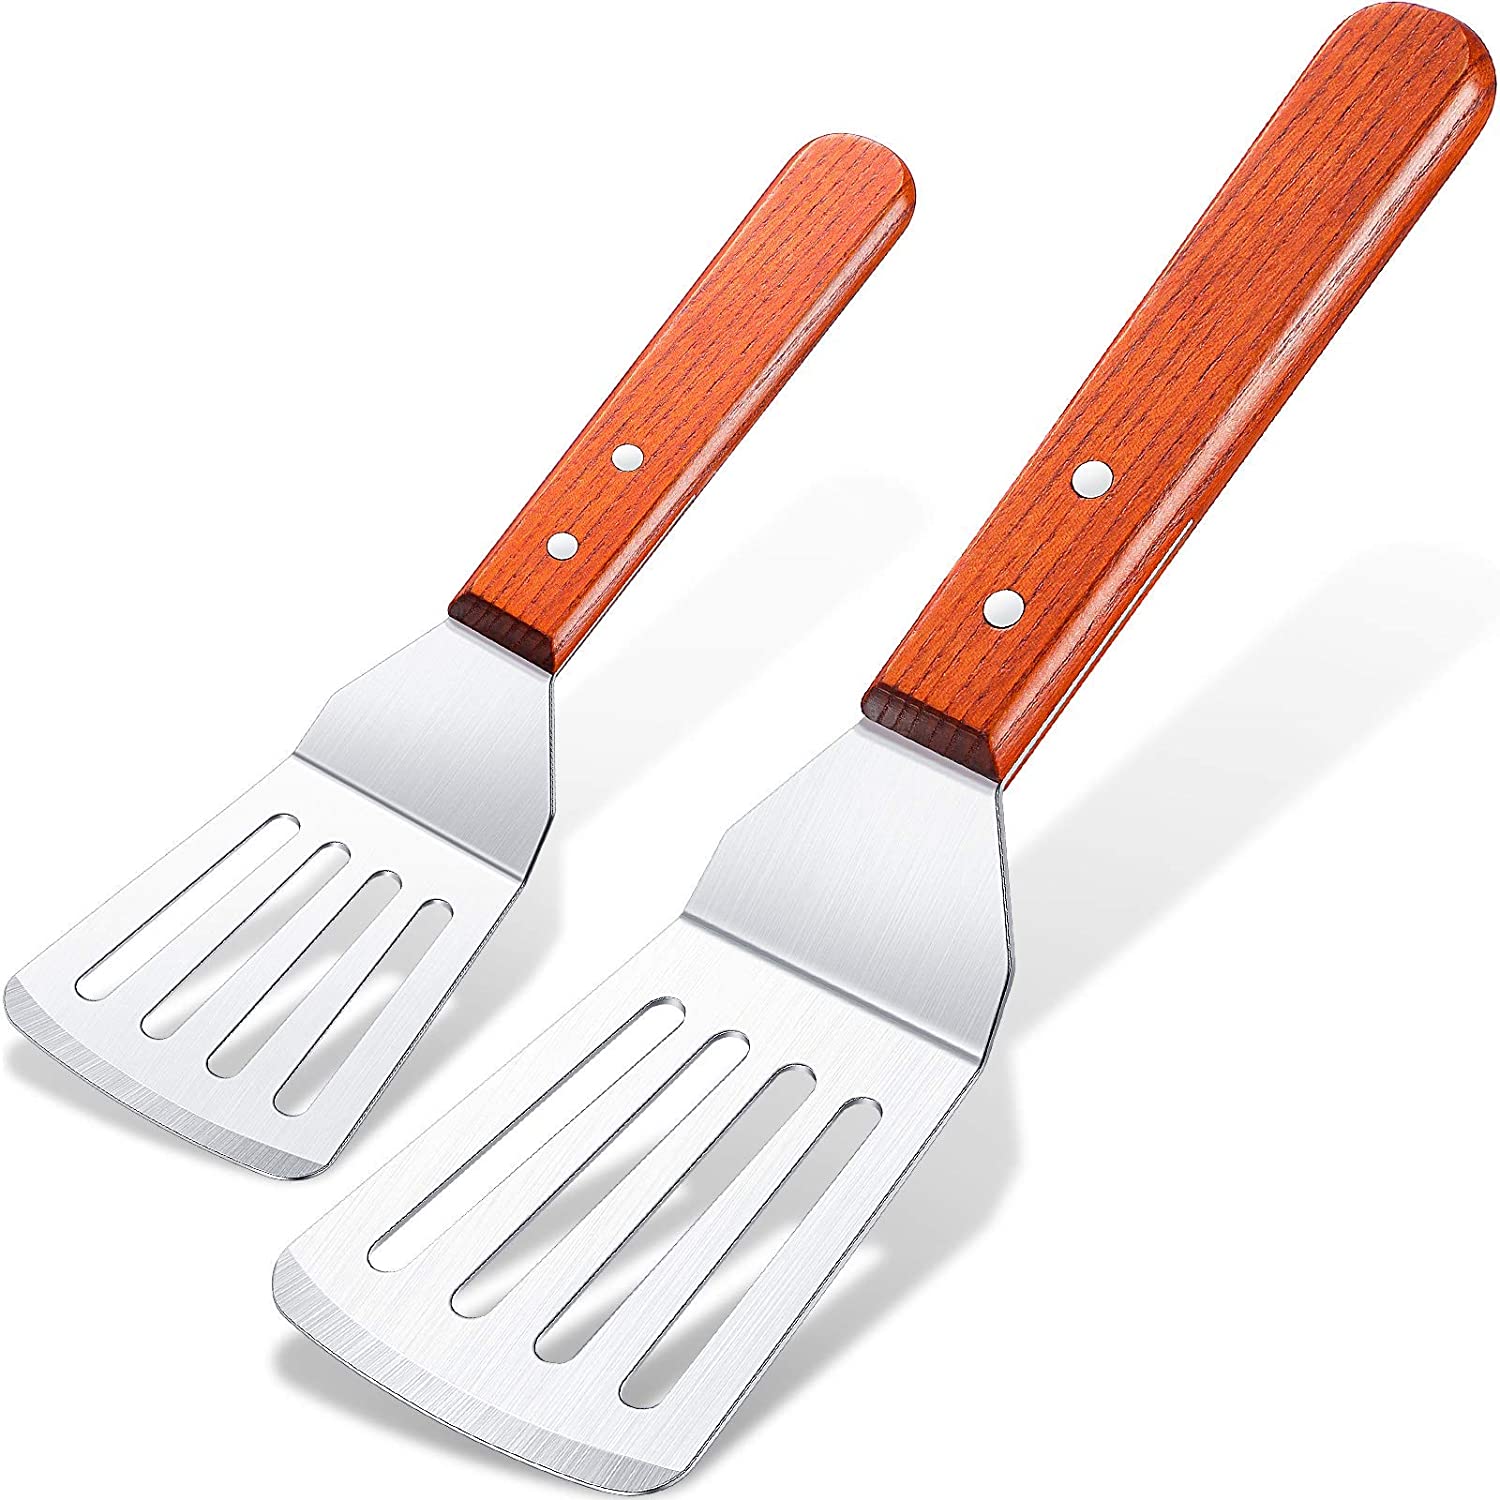 2 Pieces Slotted Fish Spatulas with Wooden Handle and Stainless Steel Wide Thin Kitchen Cooking Spatula Turner Beveled Edge Curved Spatula for Grilling Frying Cooking